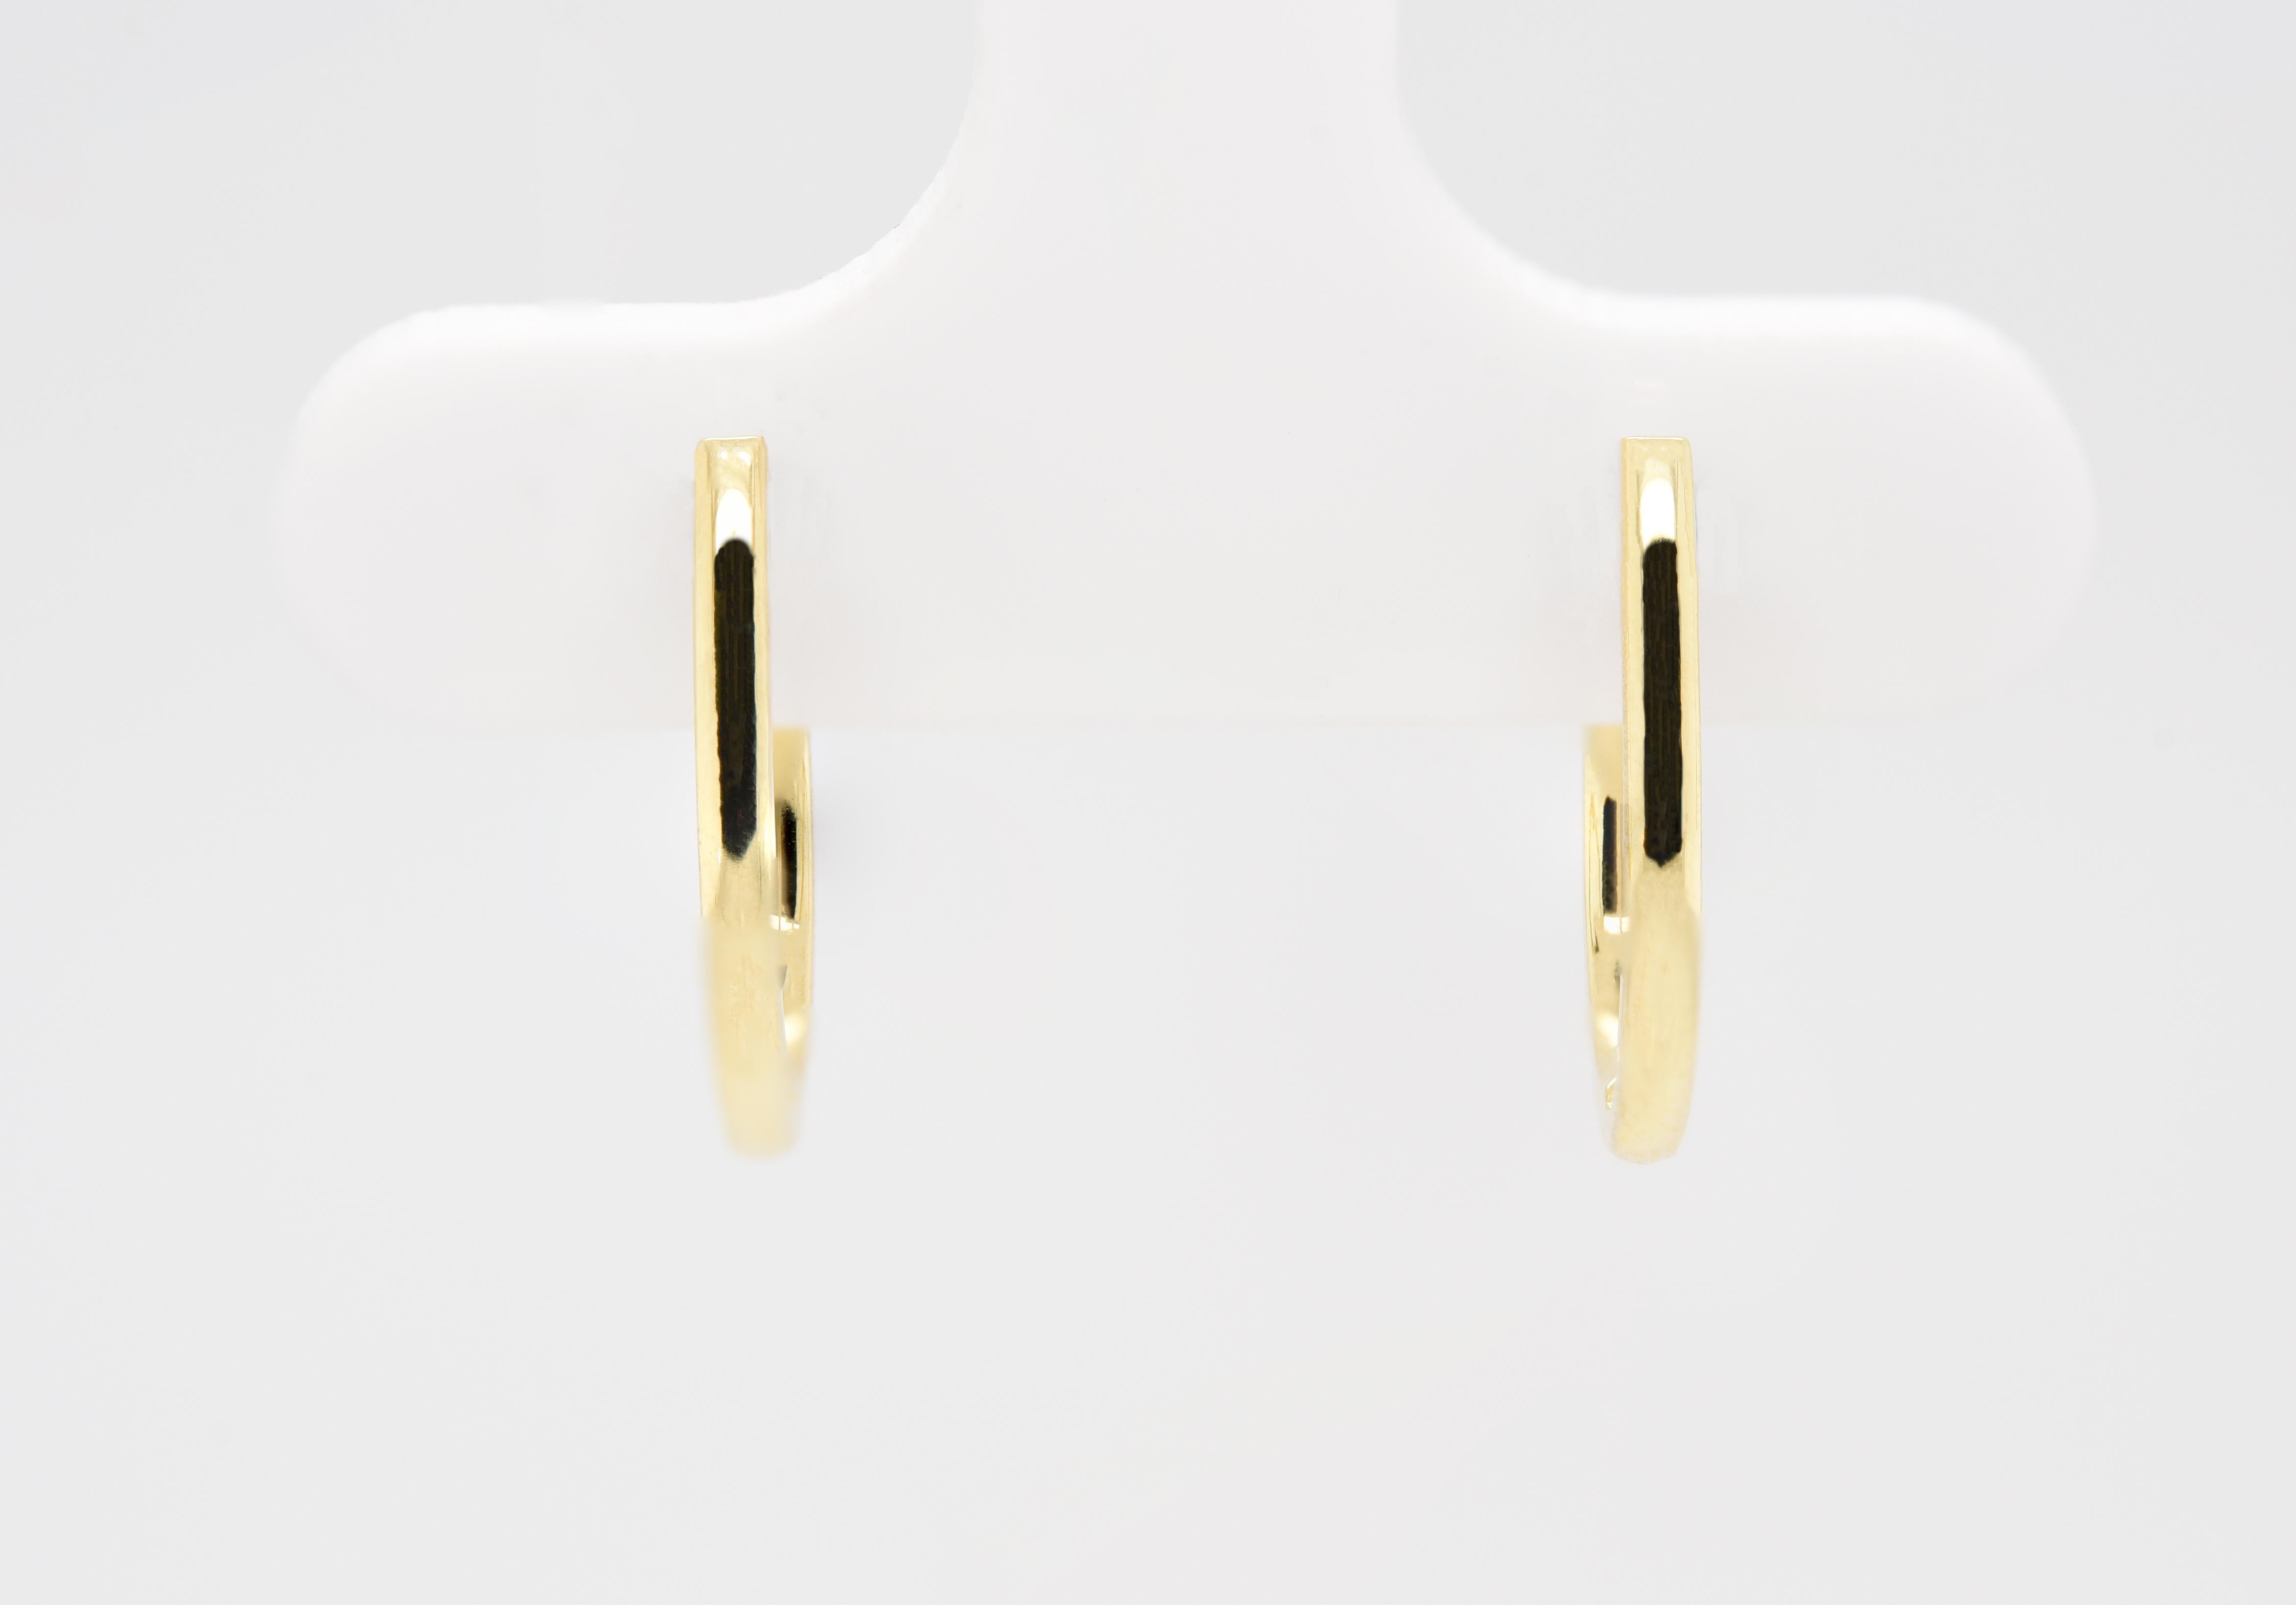 JAG New York created for you these Diamond Earrings that are comprised of .20pts total weight of diamonds set in 18K yellow gold.

Unapologetic self-expression through jewelry. JAG New York's world class designs does just that.

At JAG New York we